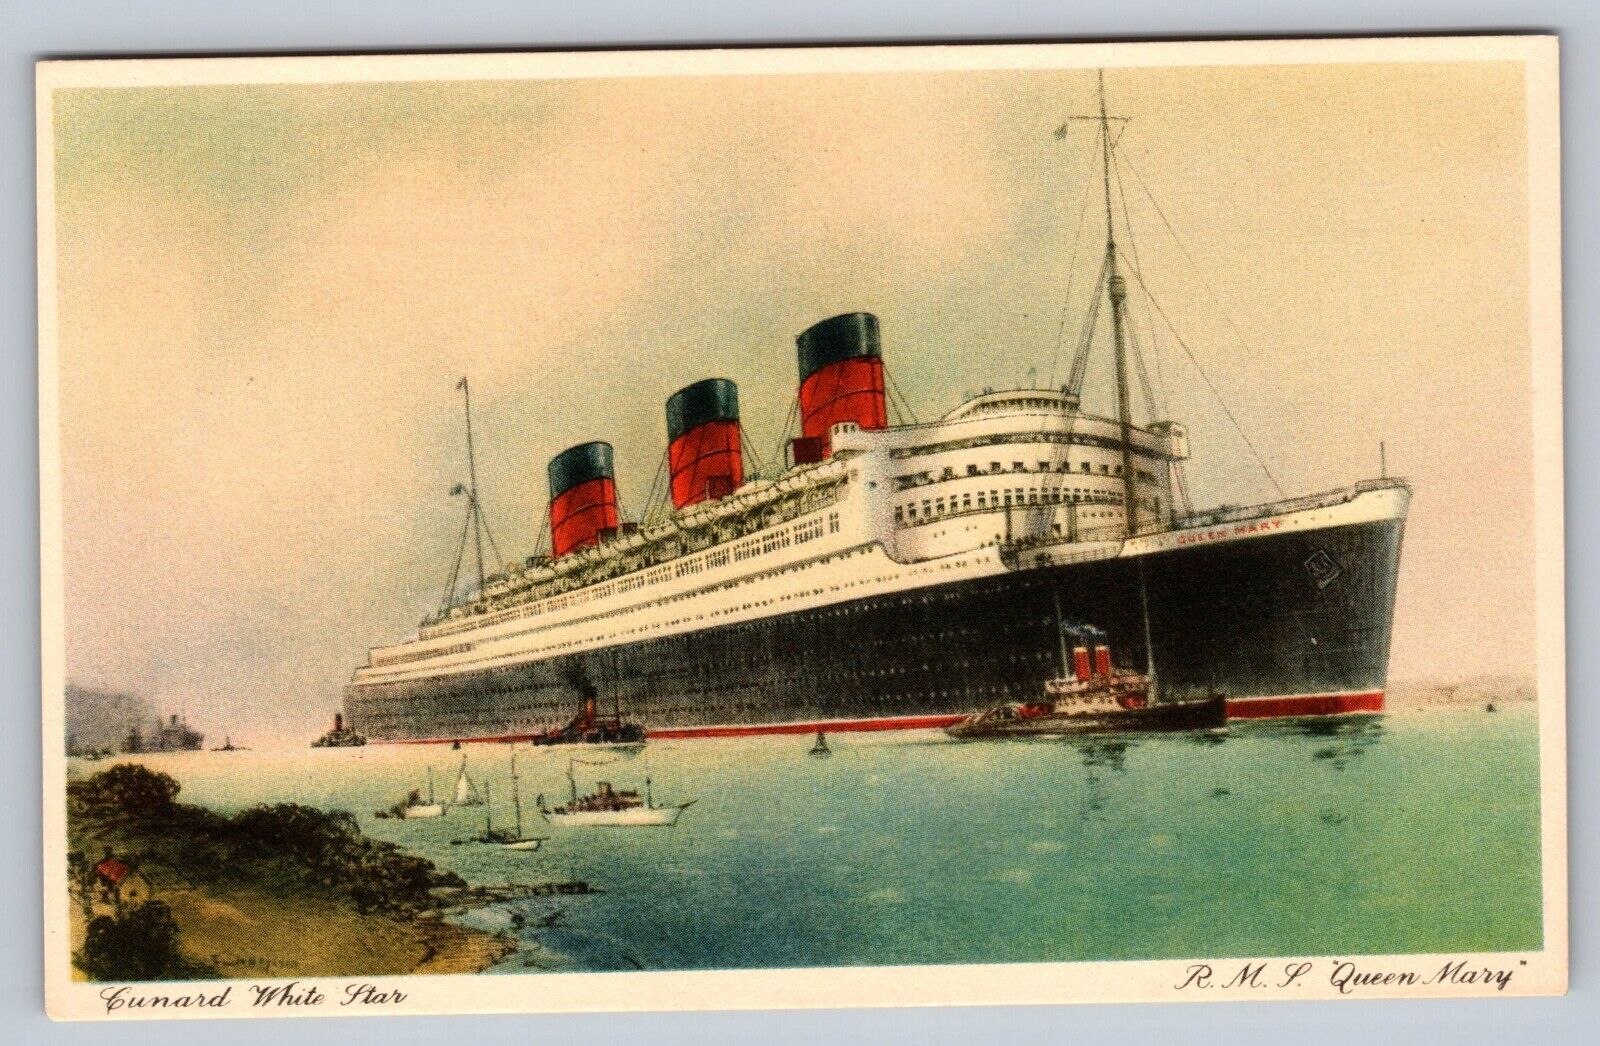 Vintage R. M. S. Queen Mary Cunard White Star UnPosted Postcard